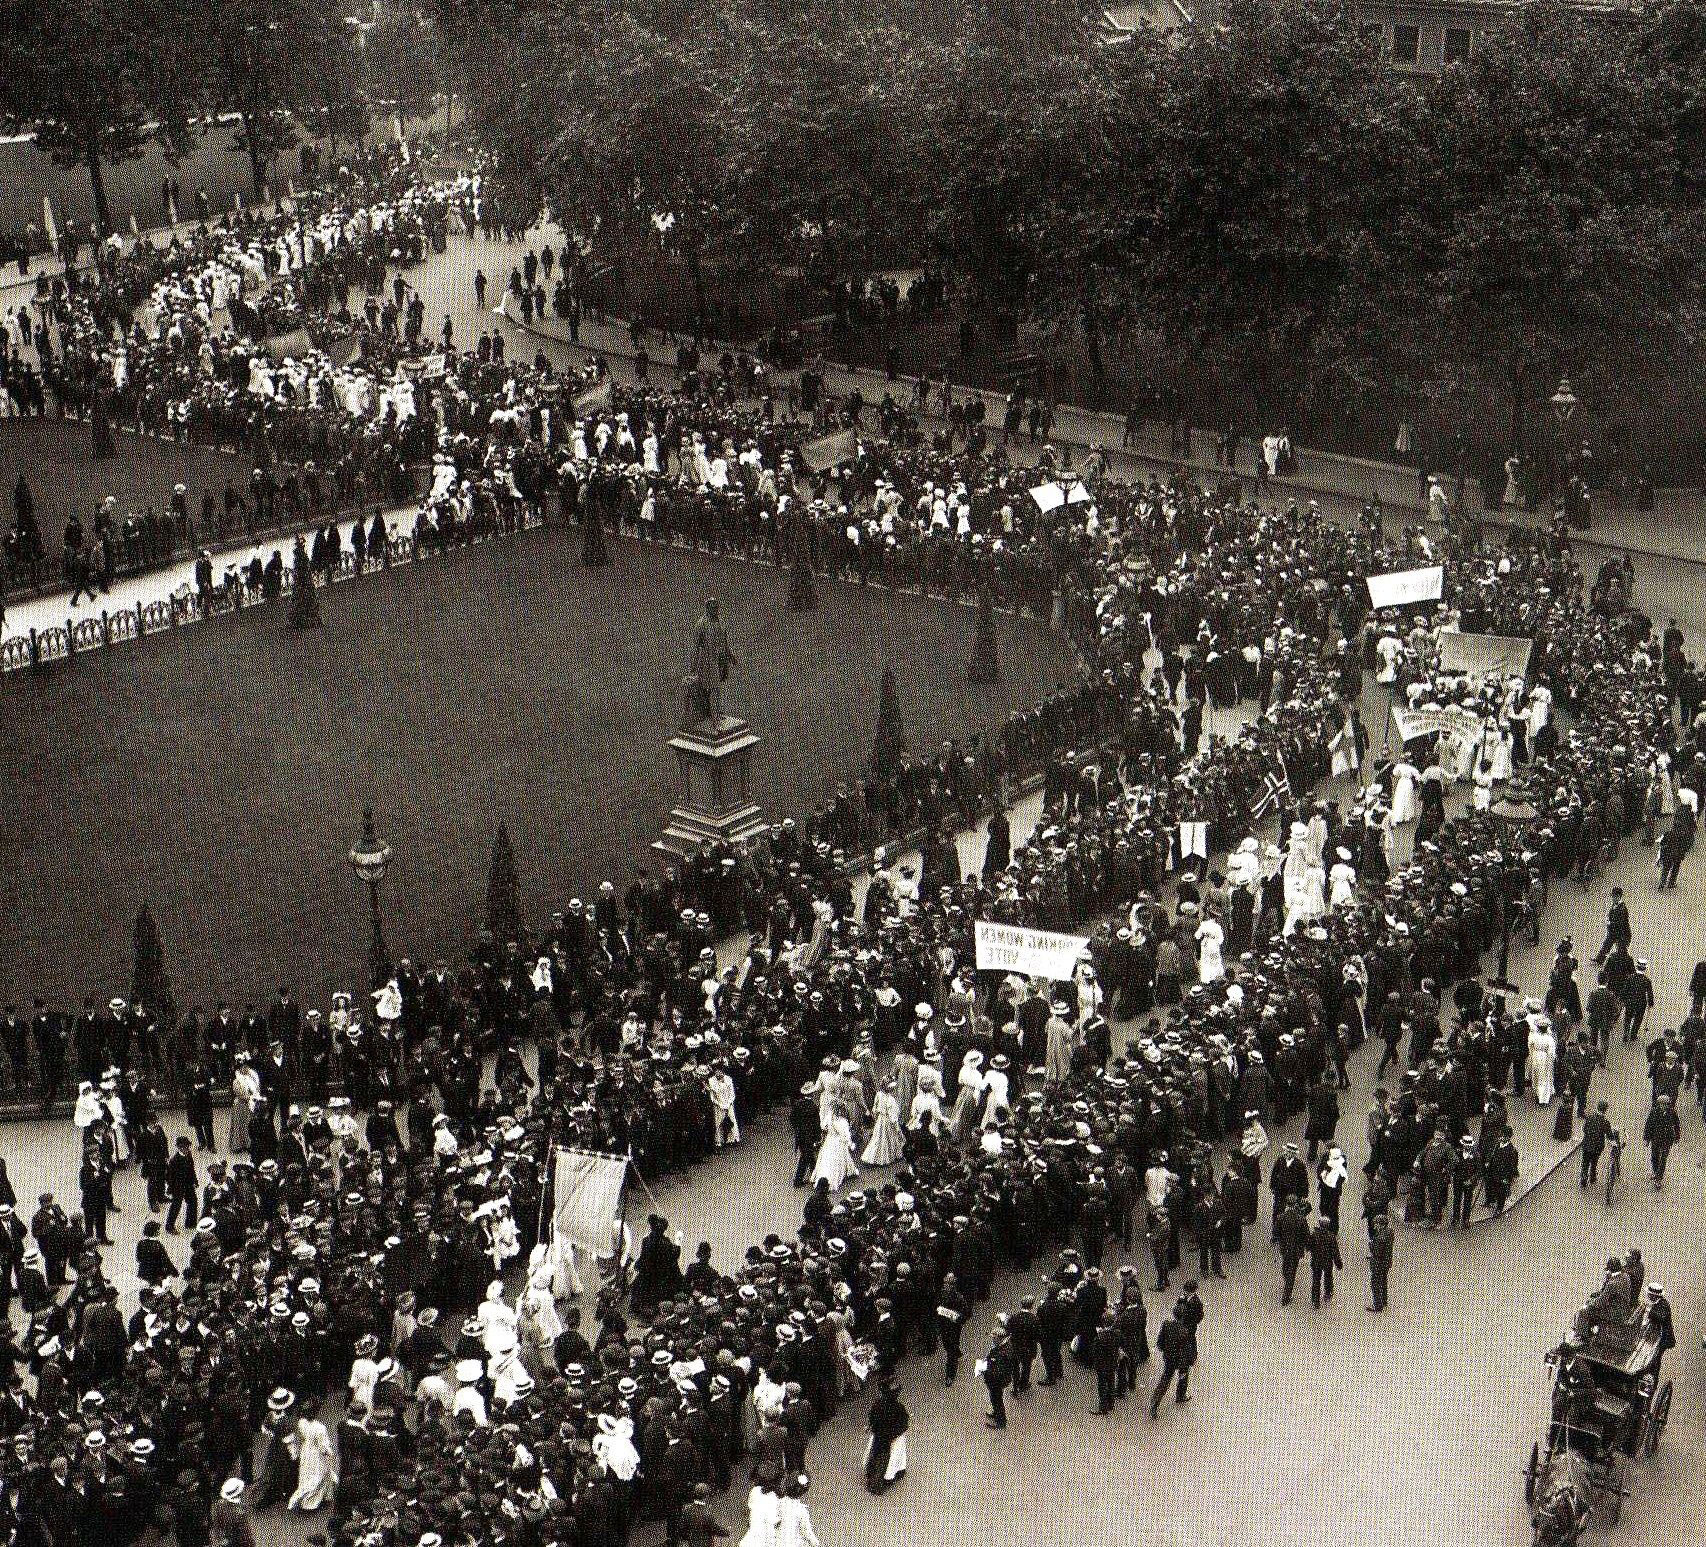 Suffragette Parade passing through Parliament Square March 19 1908